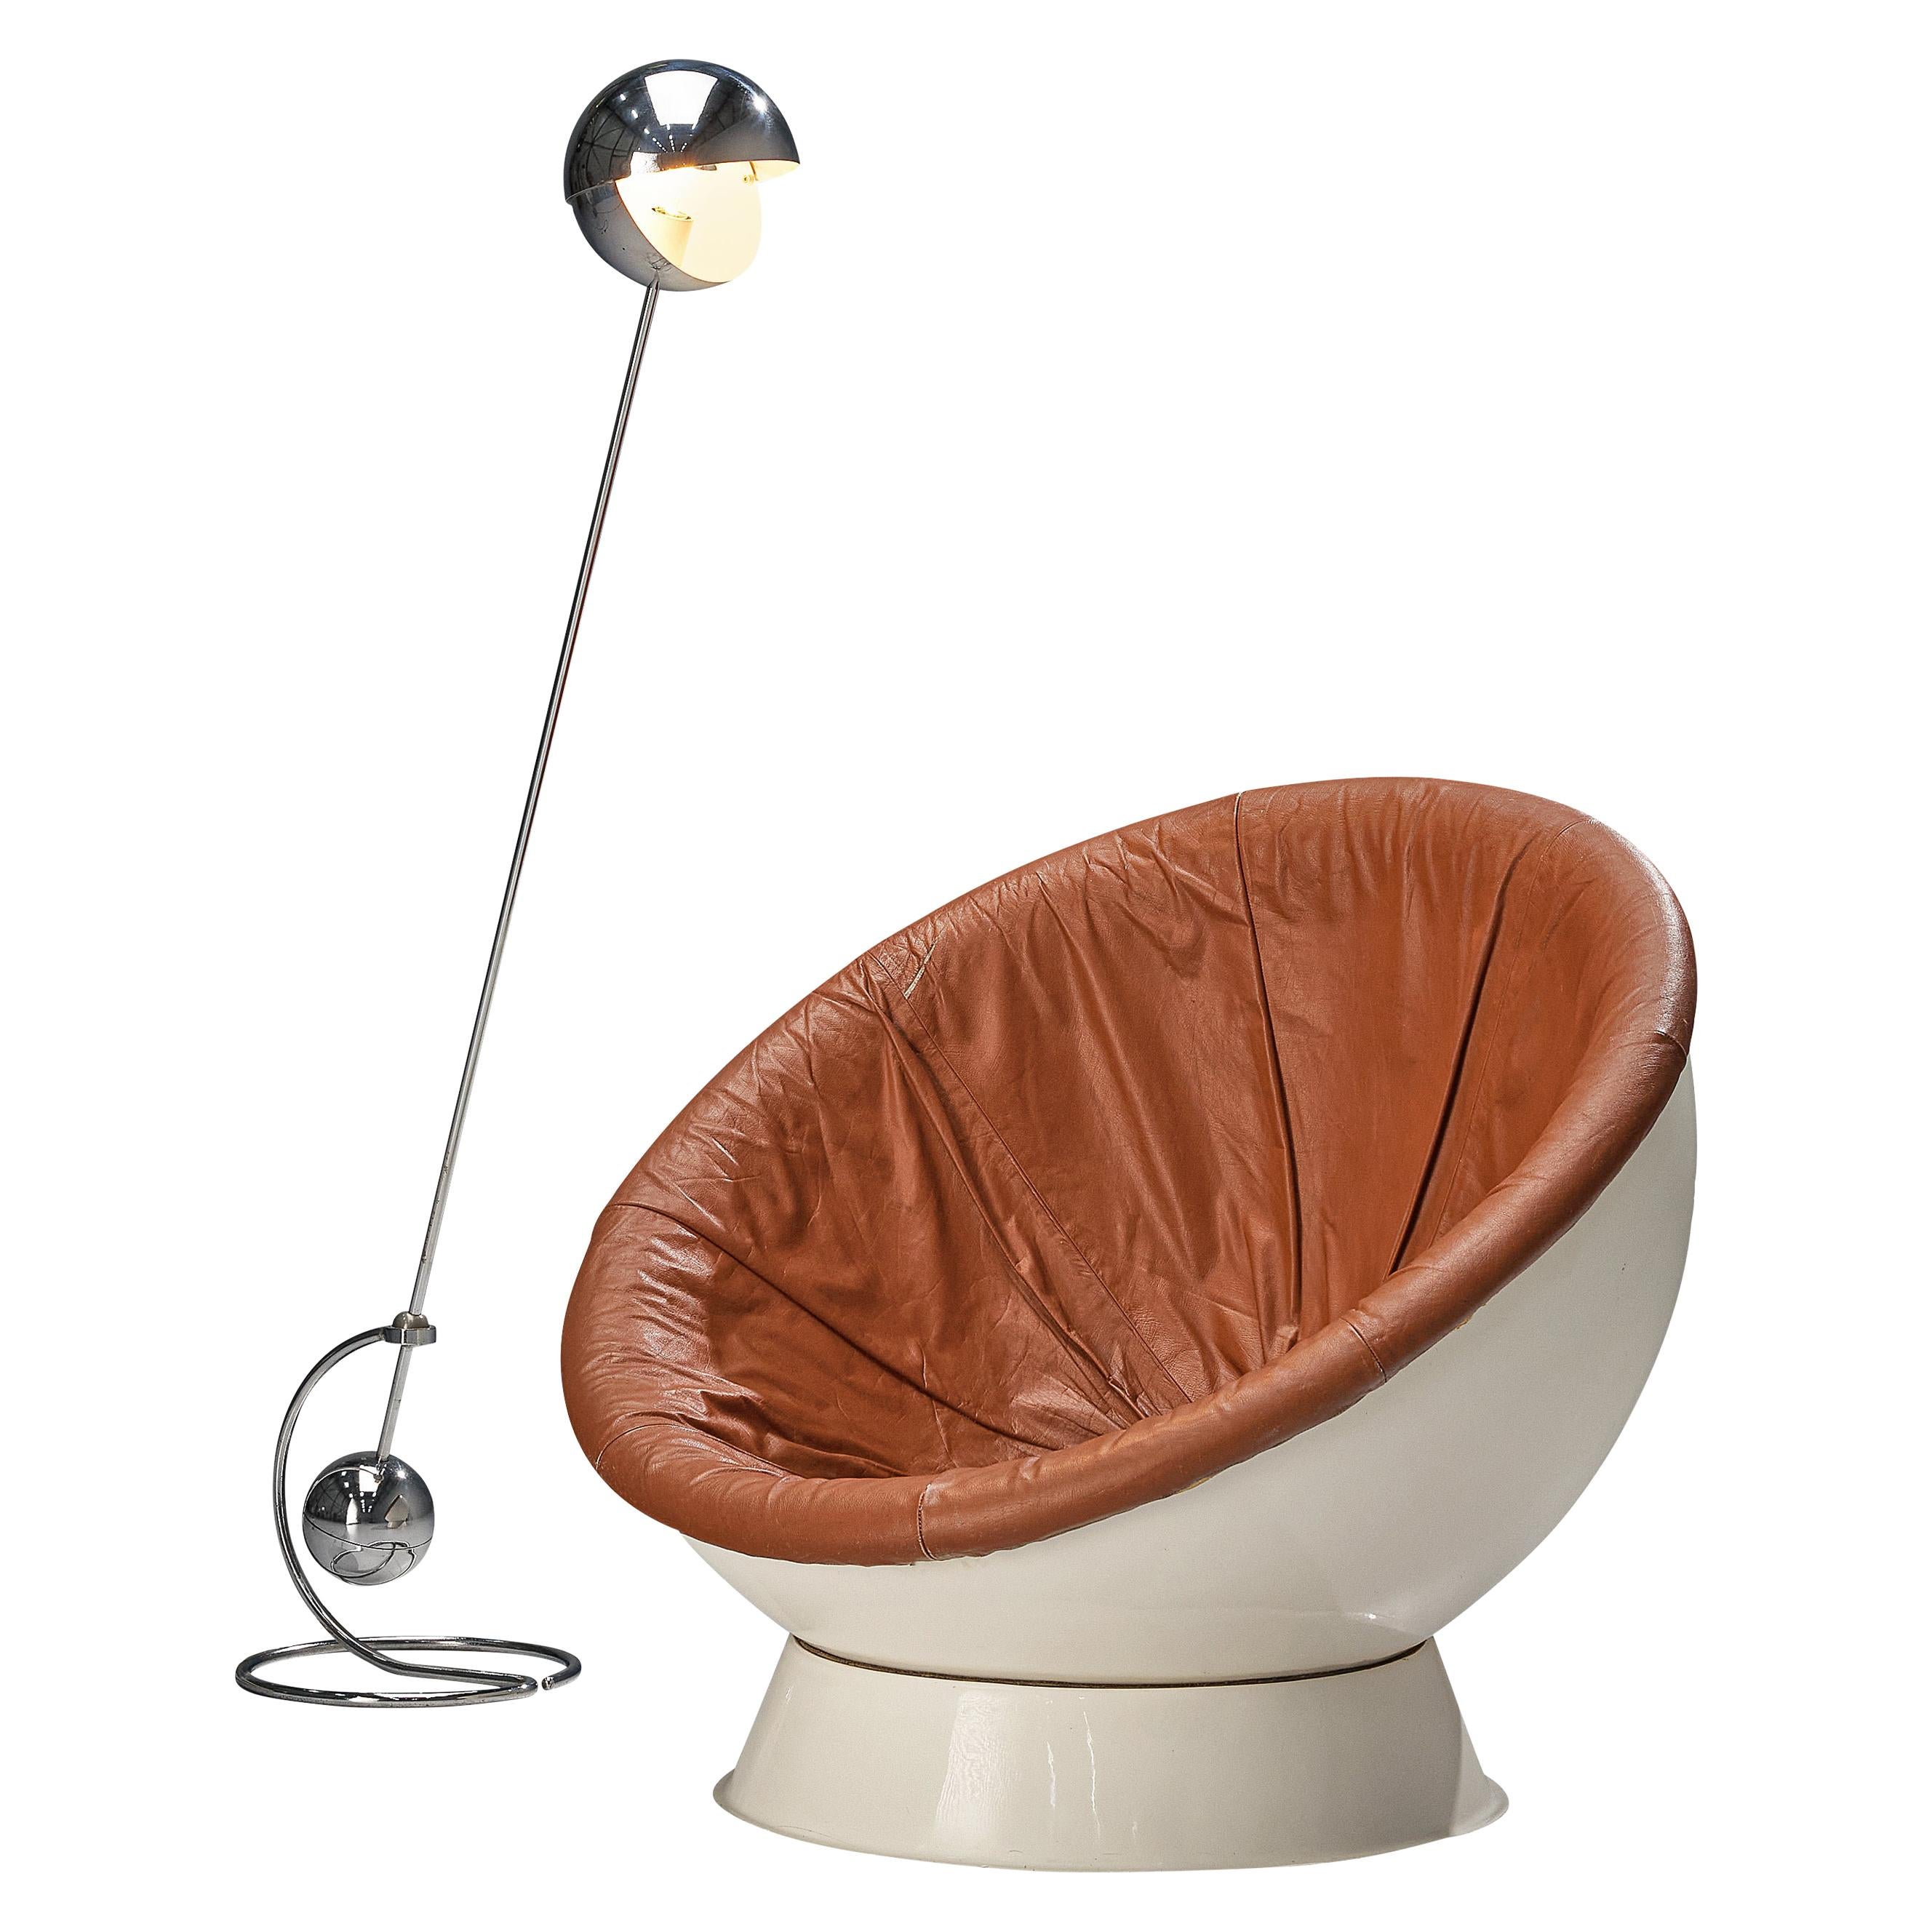 Paolo Tilche Adjustable Floor Lamp 3S with Space Age Lounge Chair in Leather